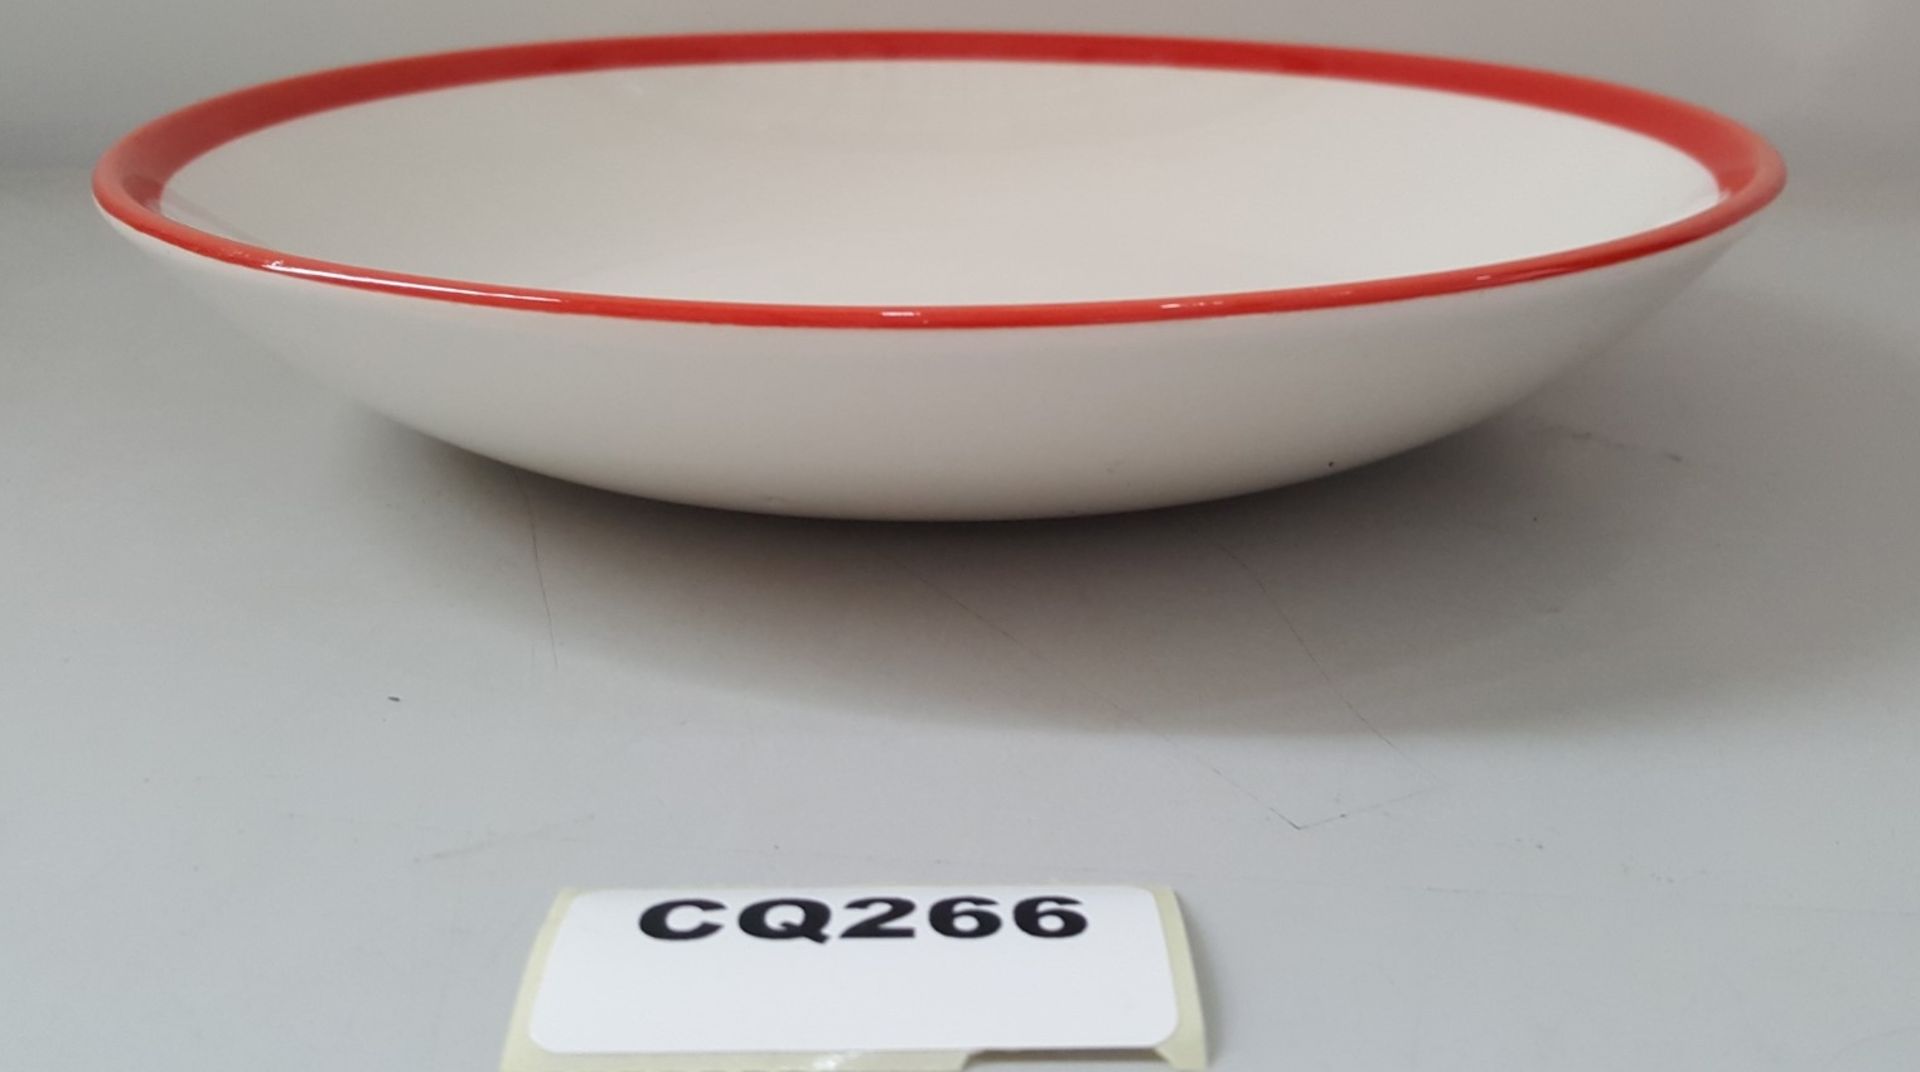 18 x Steelite Coupe Bowls White With Red Outline Egde 25CM - Ref CQ266 - Image 5 of 5